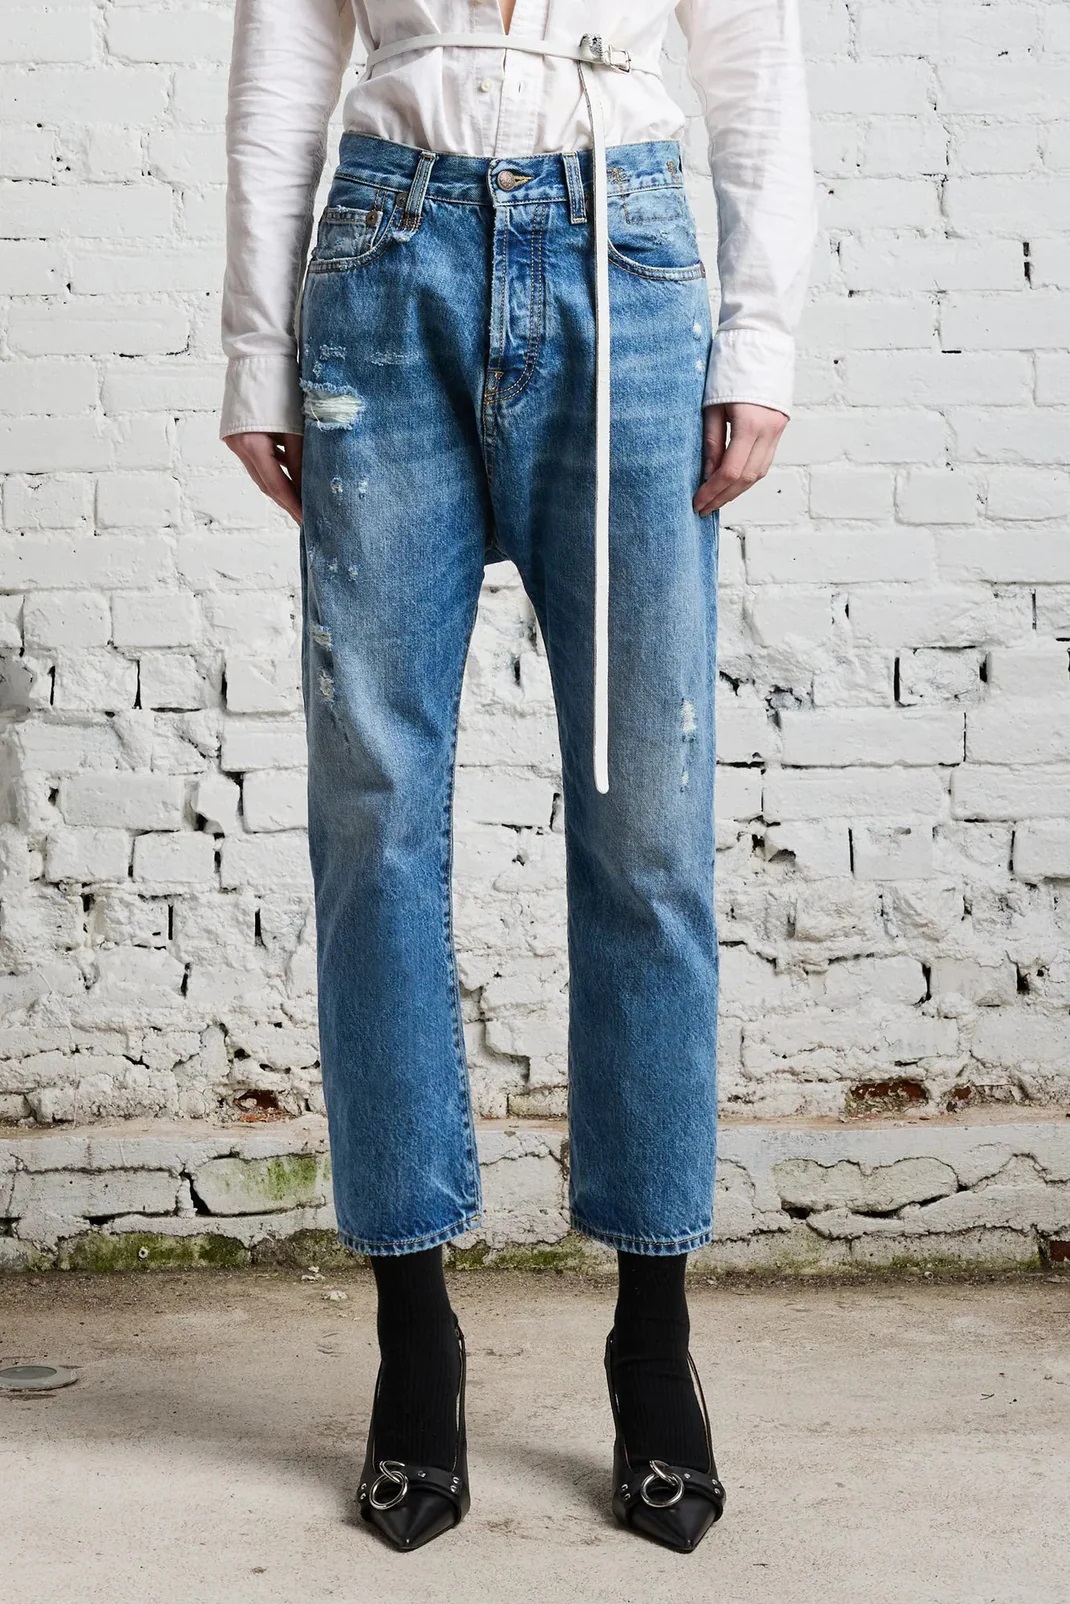 R13 Tailored Drop Jeans in Bain Washing 26